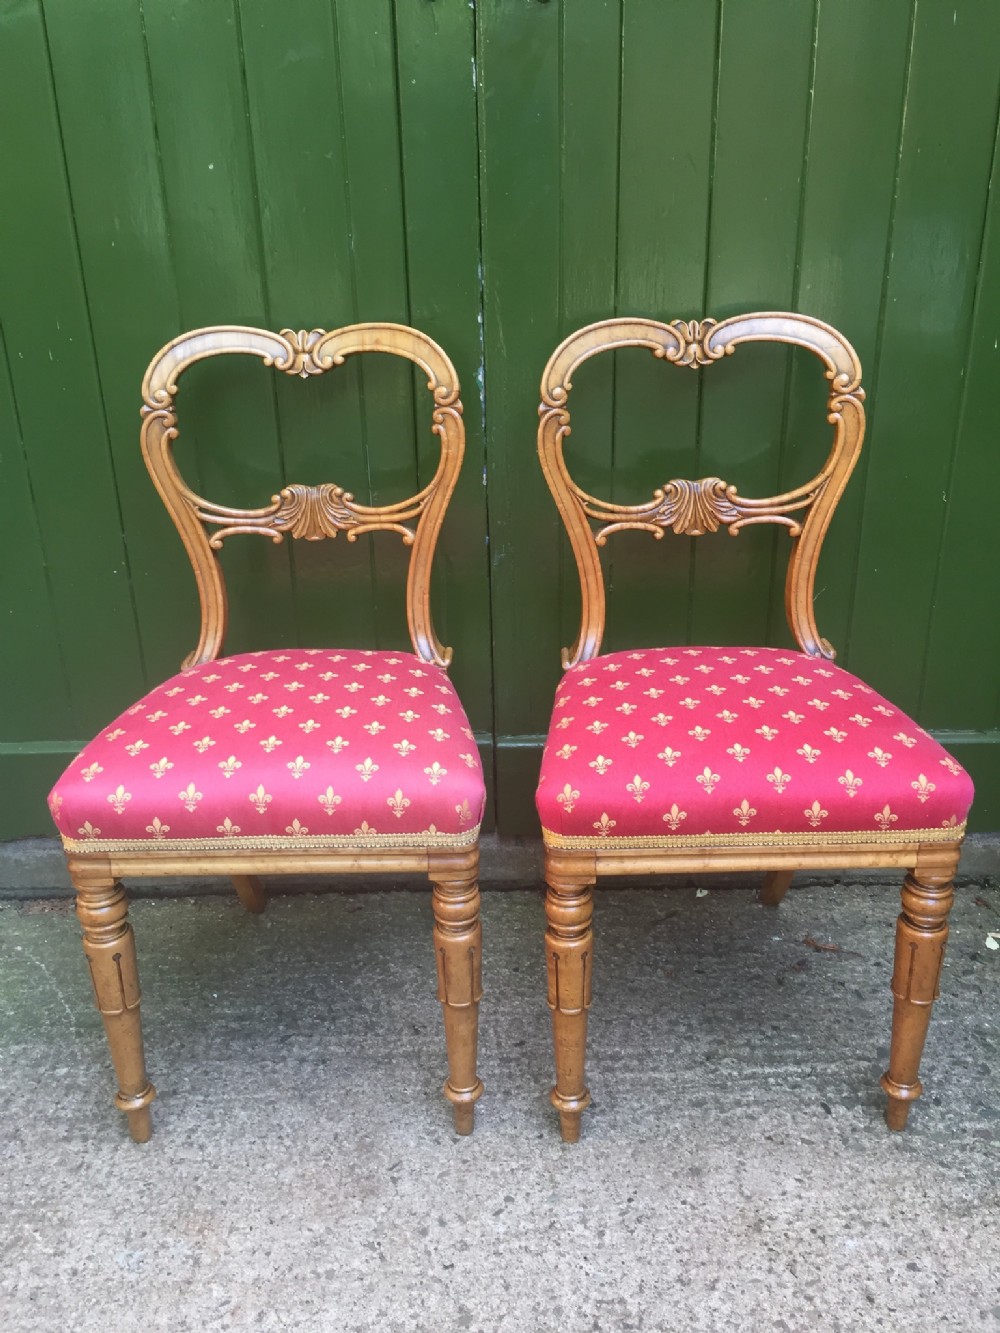 pair of early c19th william iv period maple bedroom or occasional chairs in the manner of gillows